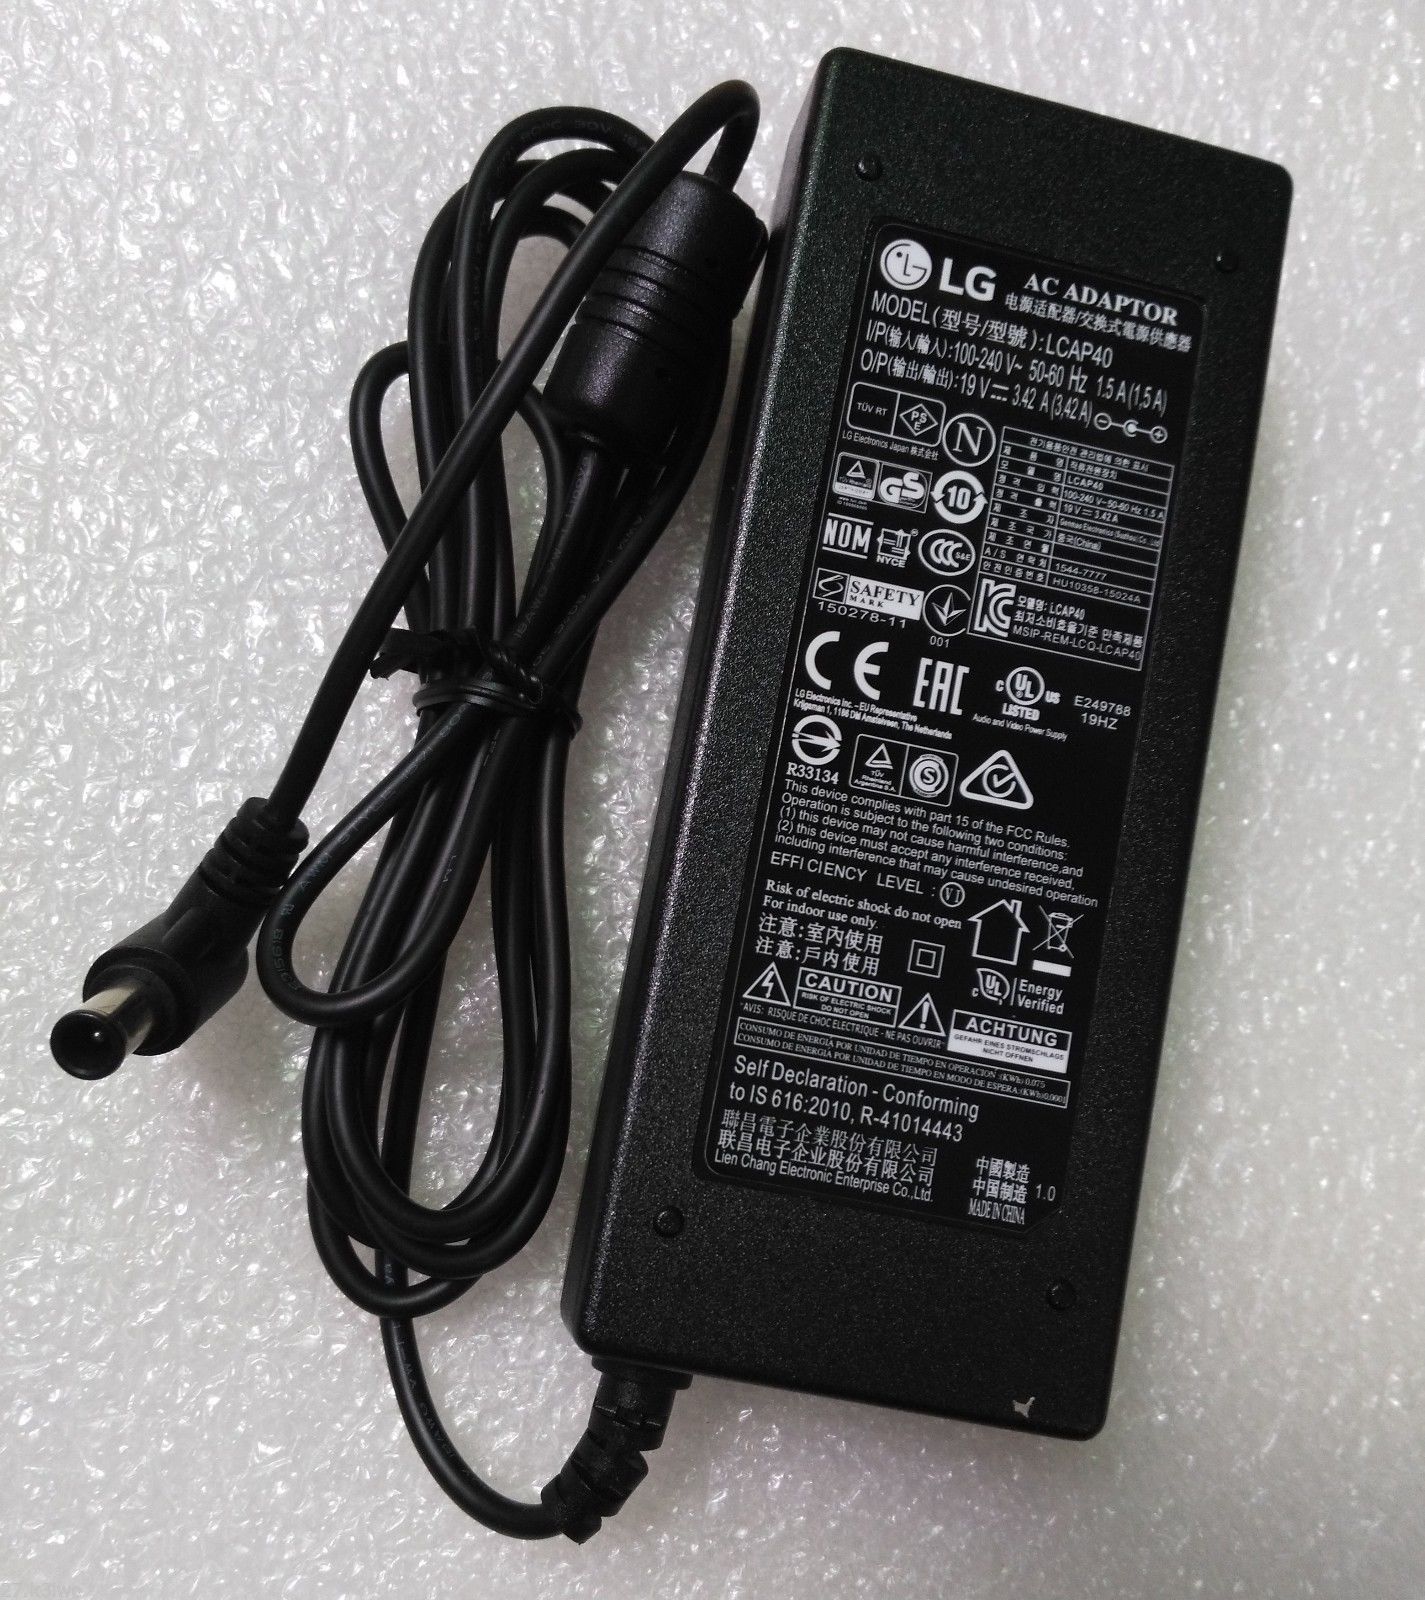 New 19V 3.42A LG Electronics LCAP40 Power Supply AC Adapter Charger for 43LH510V LED TV